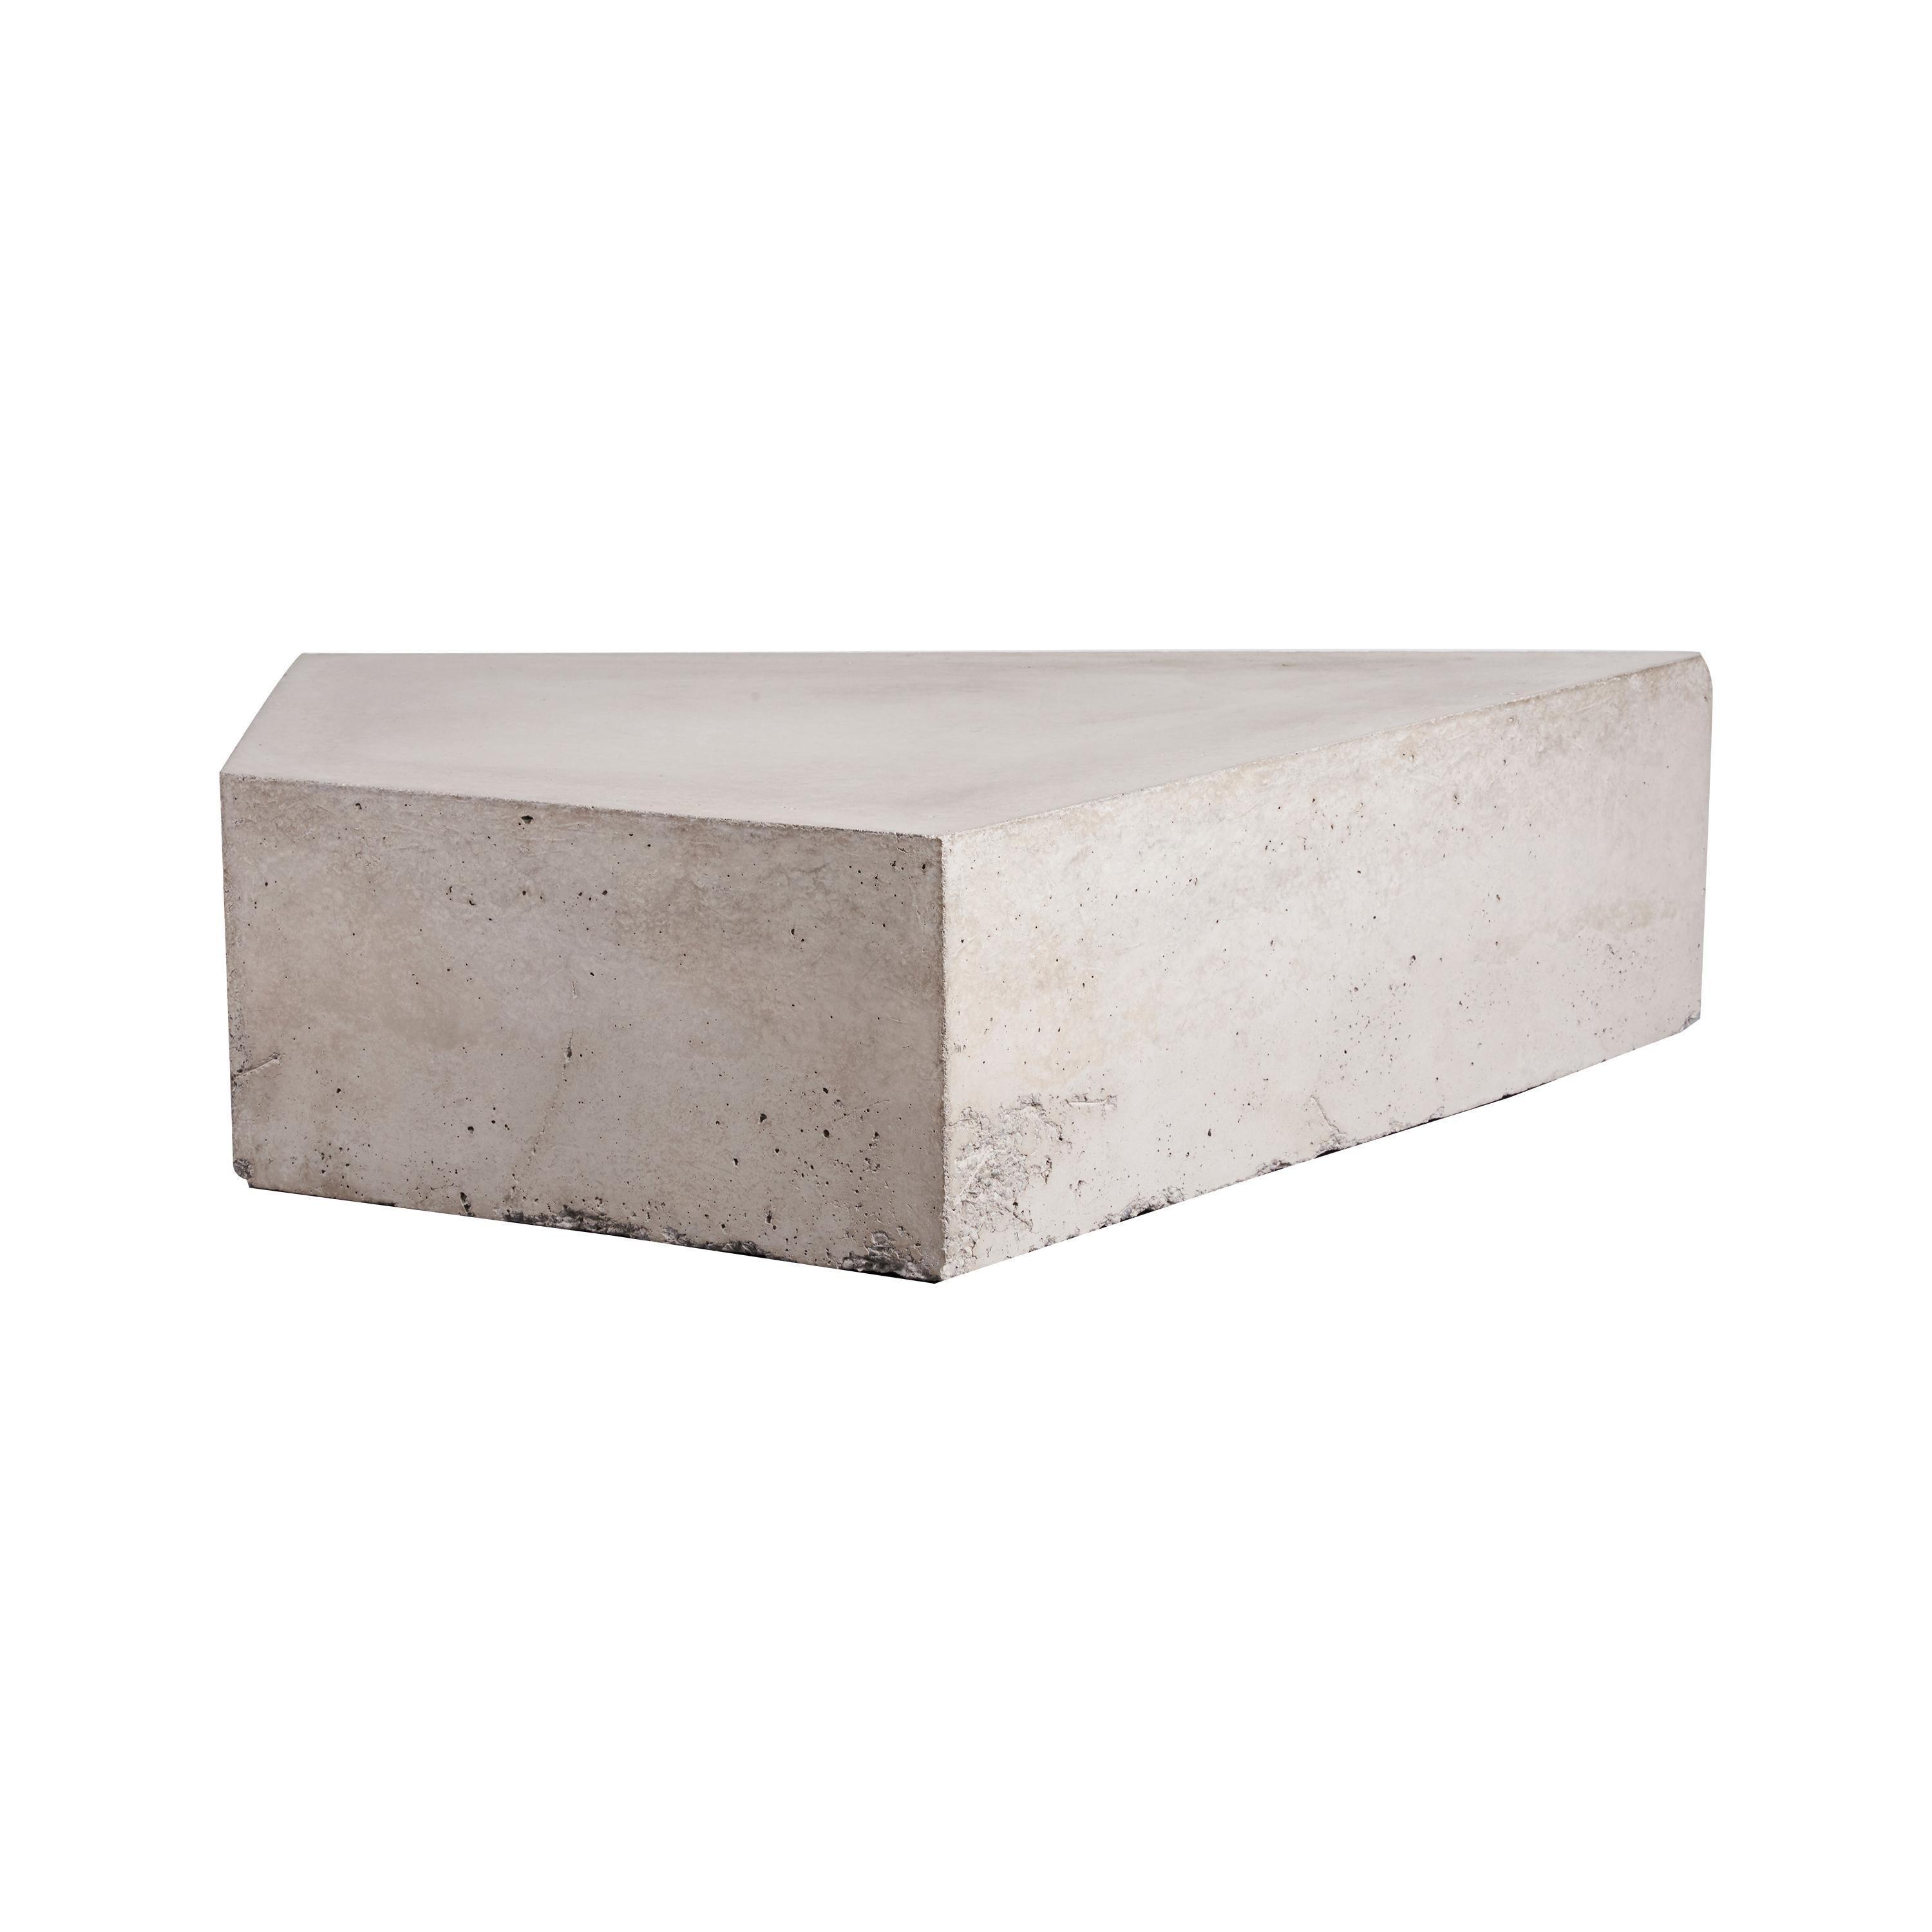 'Goldstein' Reinforced Concrete Table, One of a Kind Artwork by Littlewhitehead